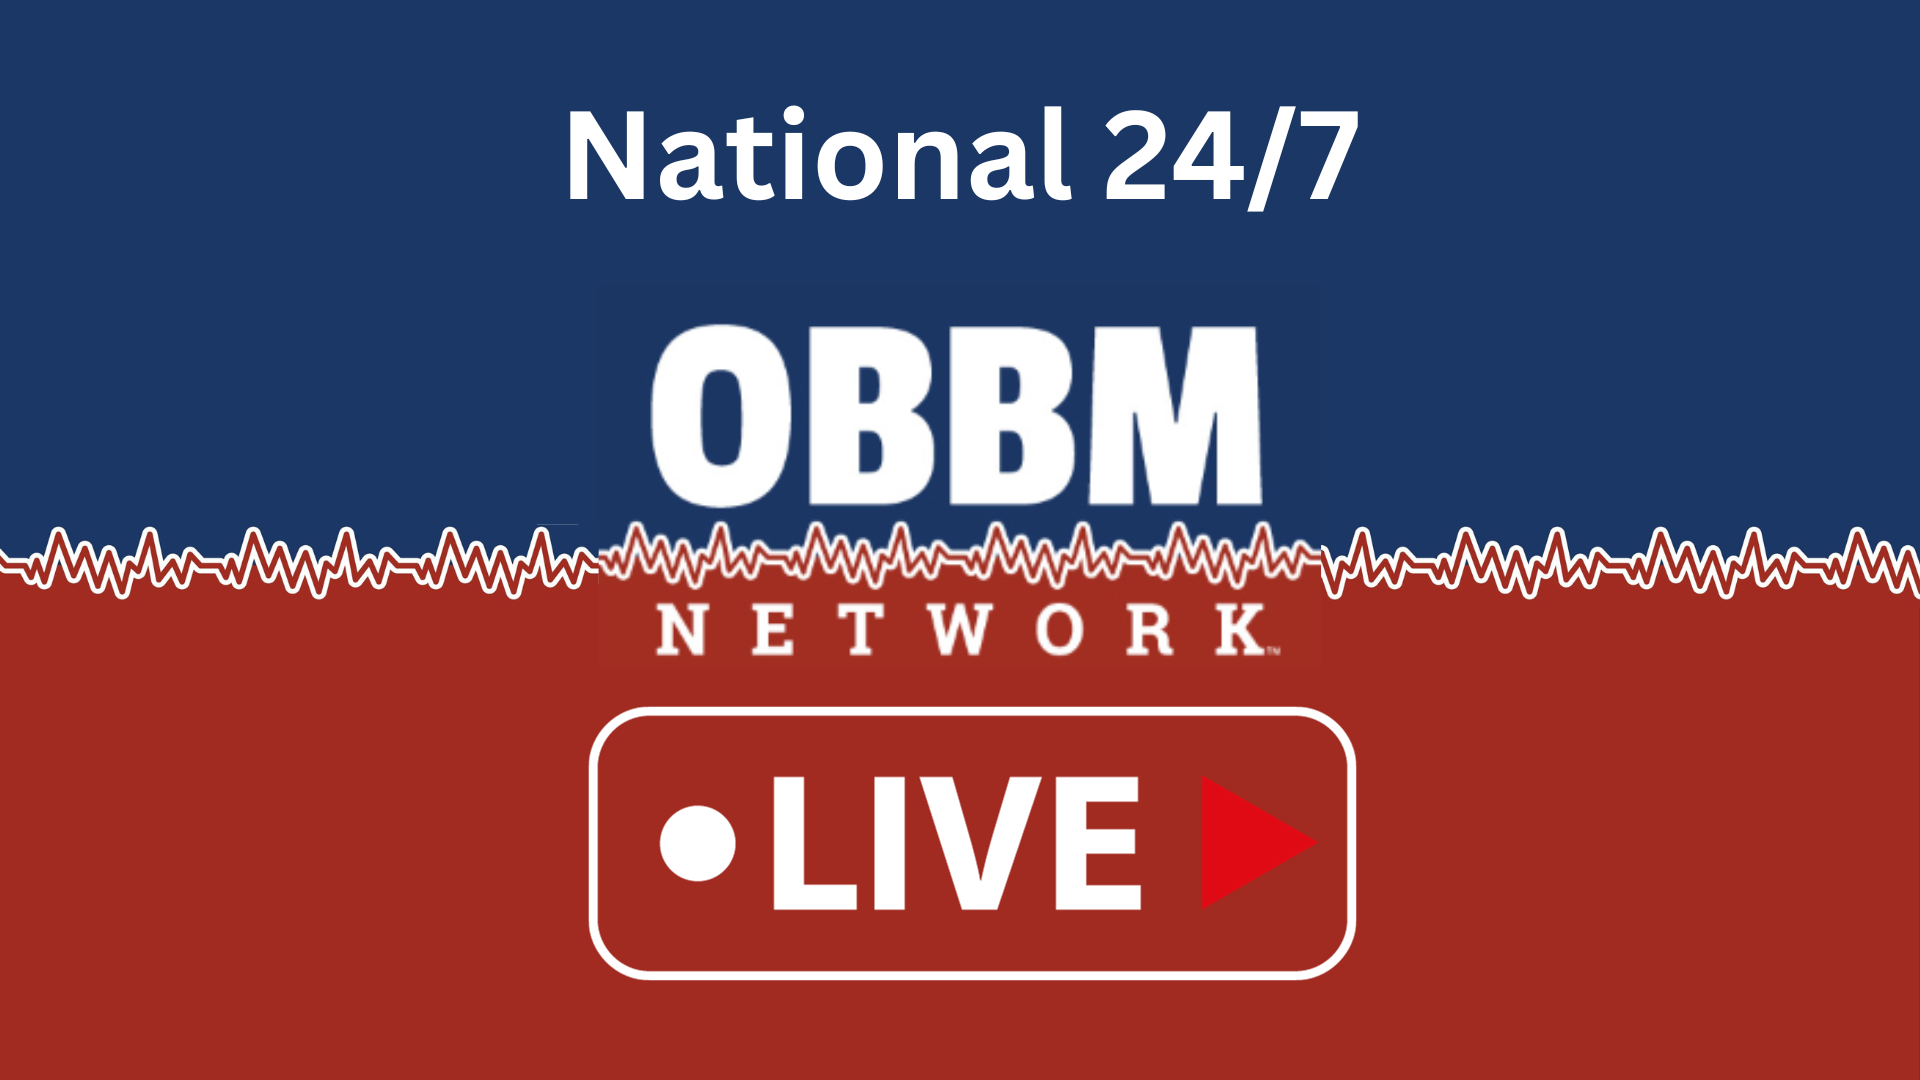 National Live Channel - OBBM Network